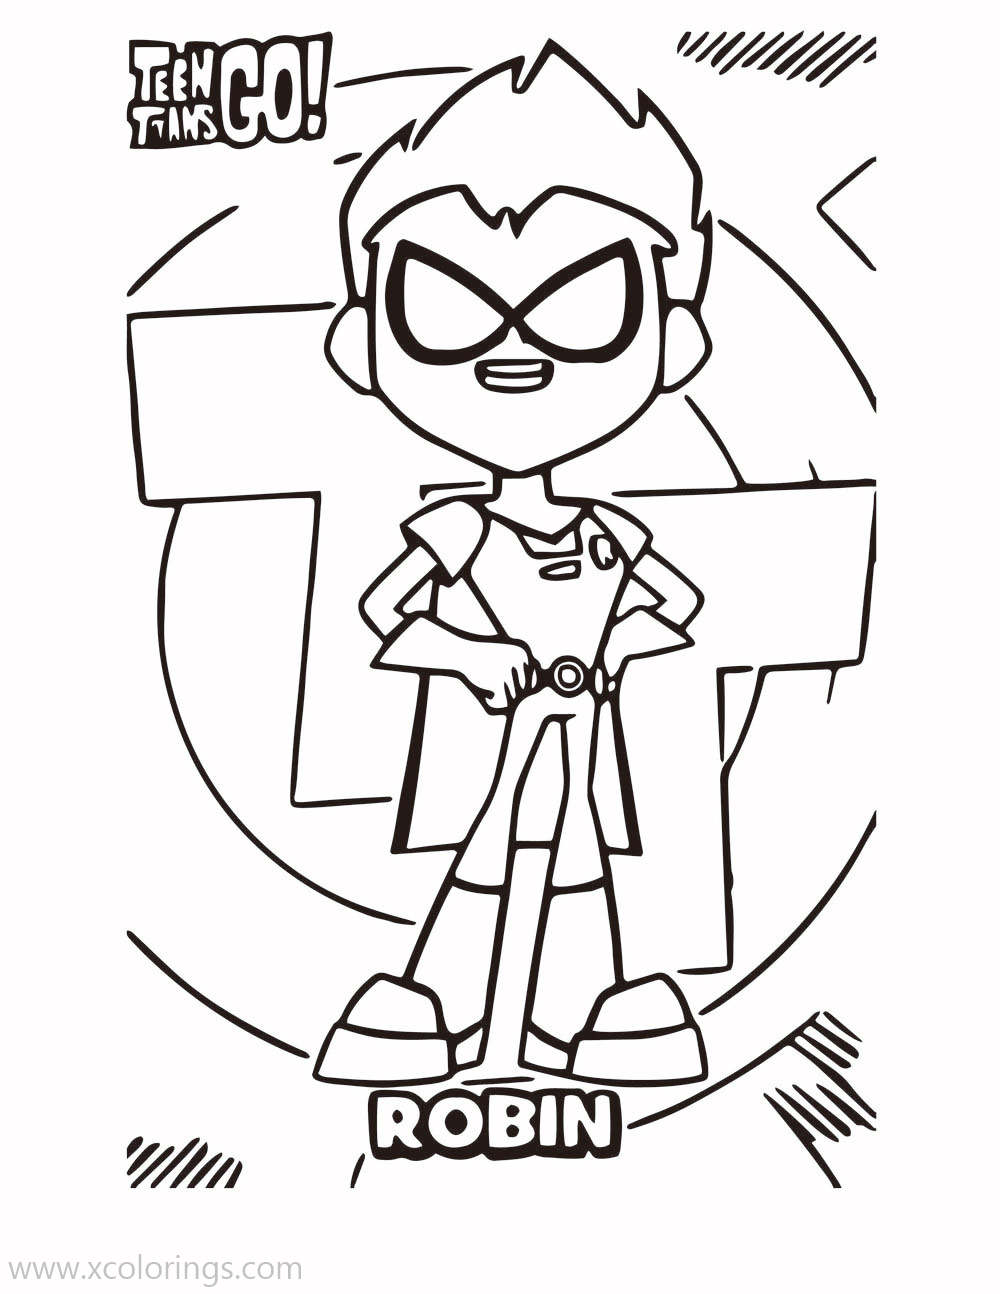 Free Teen Titans Go Coloring Pages Boy Robin printable